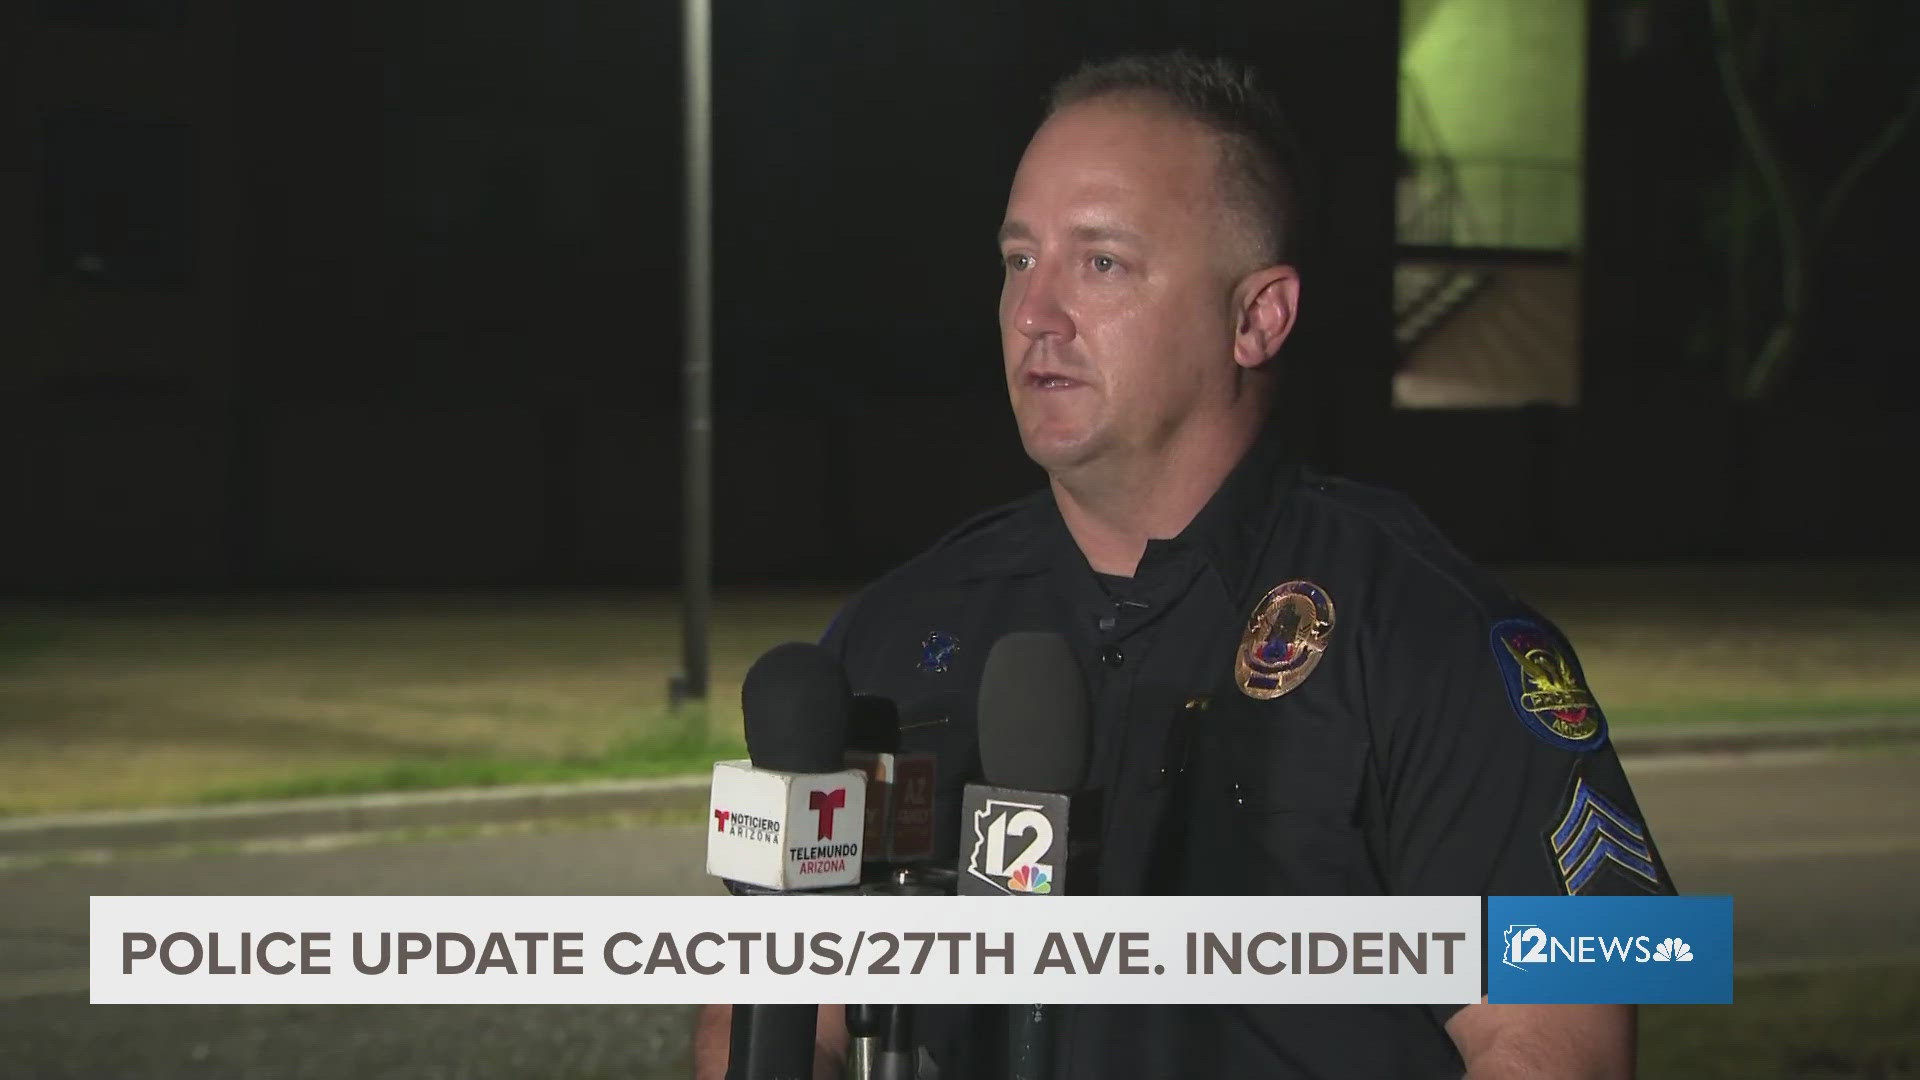 The man allegedly fired shots at responding Phoenix officers, striking one of their vehicles.